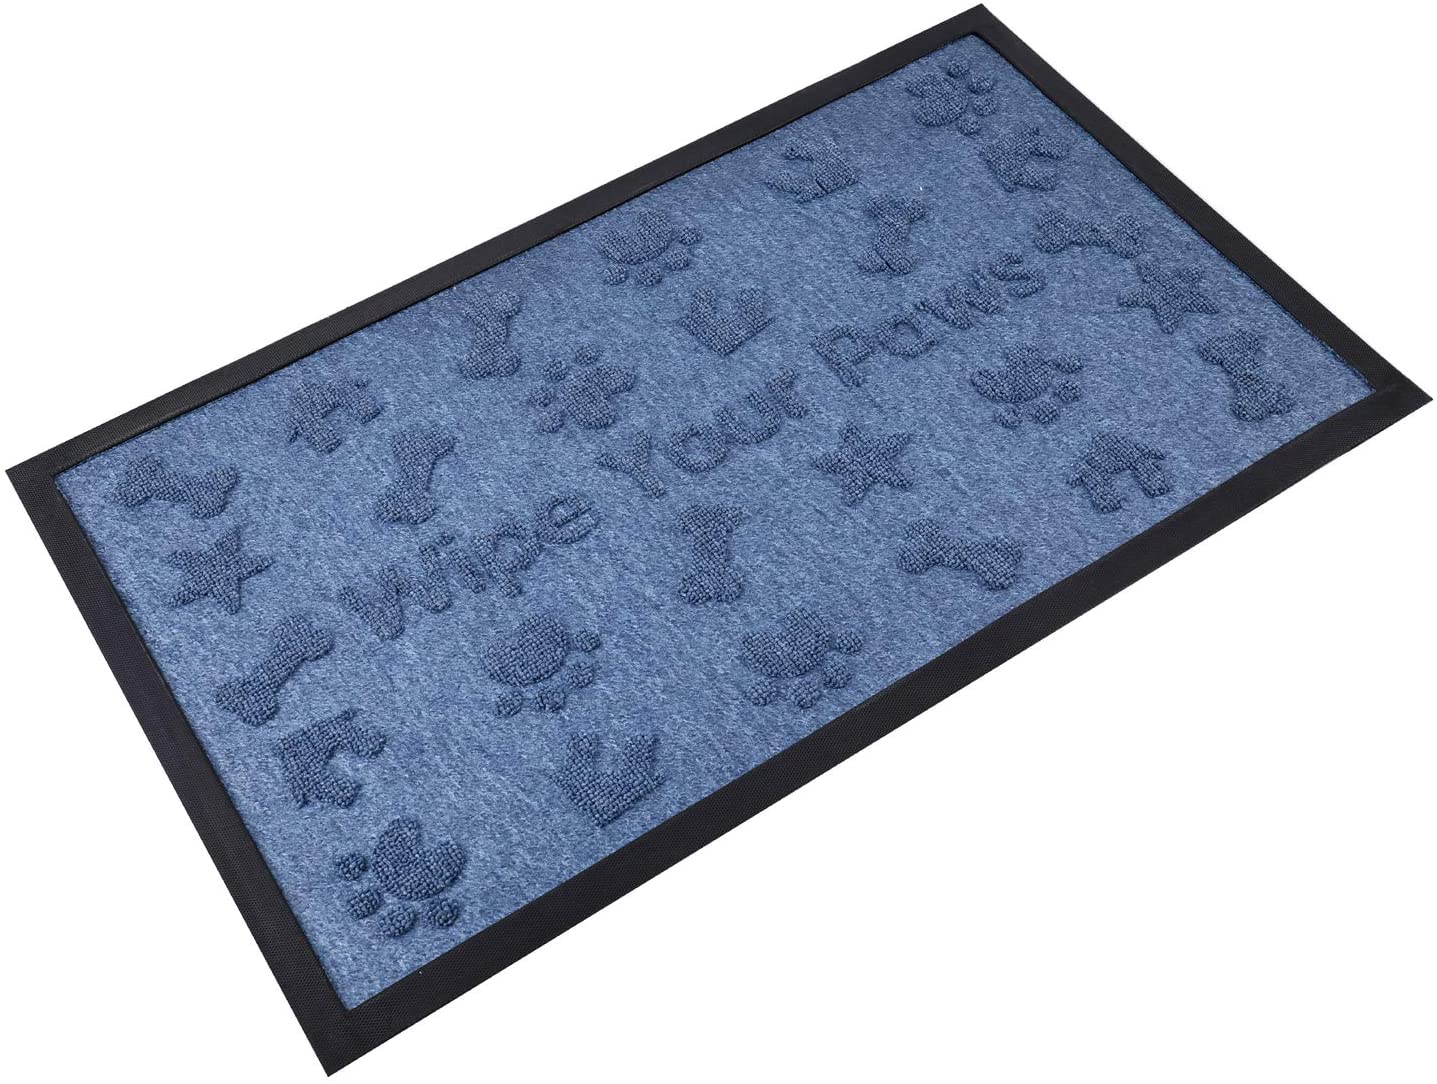 Rubber Doormat/Entrance Mat - 29.5 x 18 Inches - Heavy Duty & Easy Clean Floor Mat with Non Slip Backing for Indoor/Outdoor Entryway (Blue)